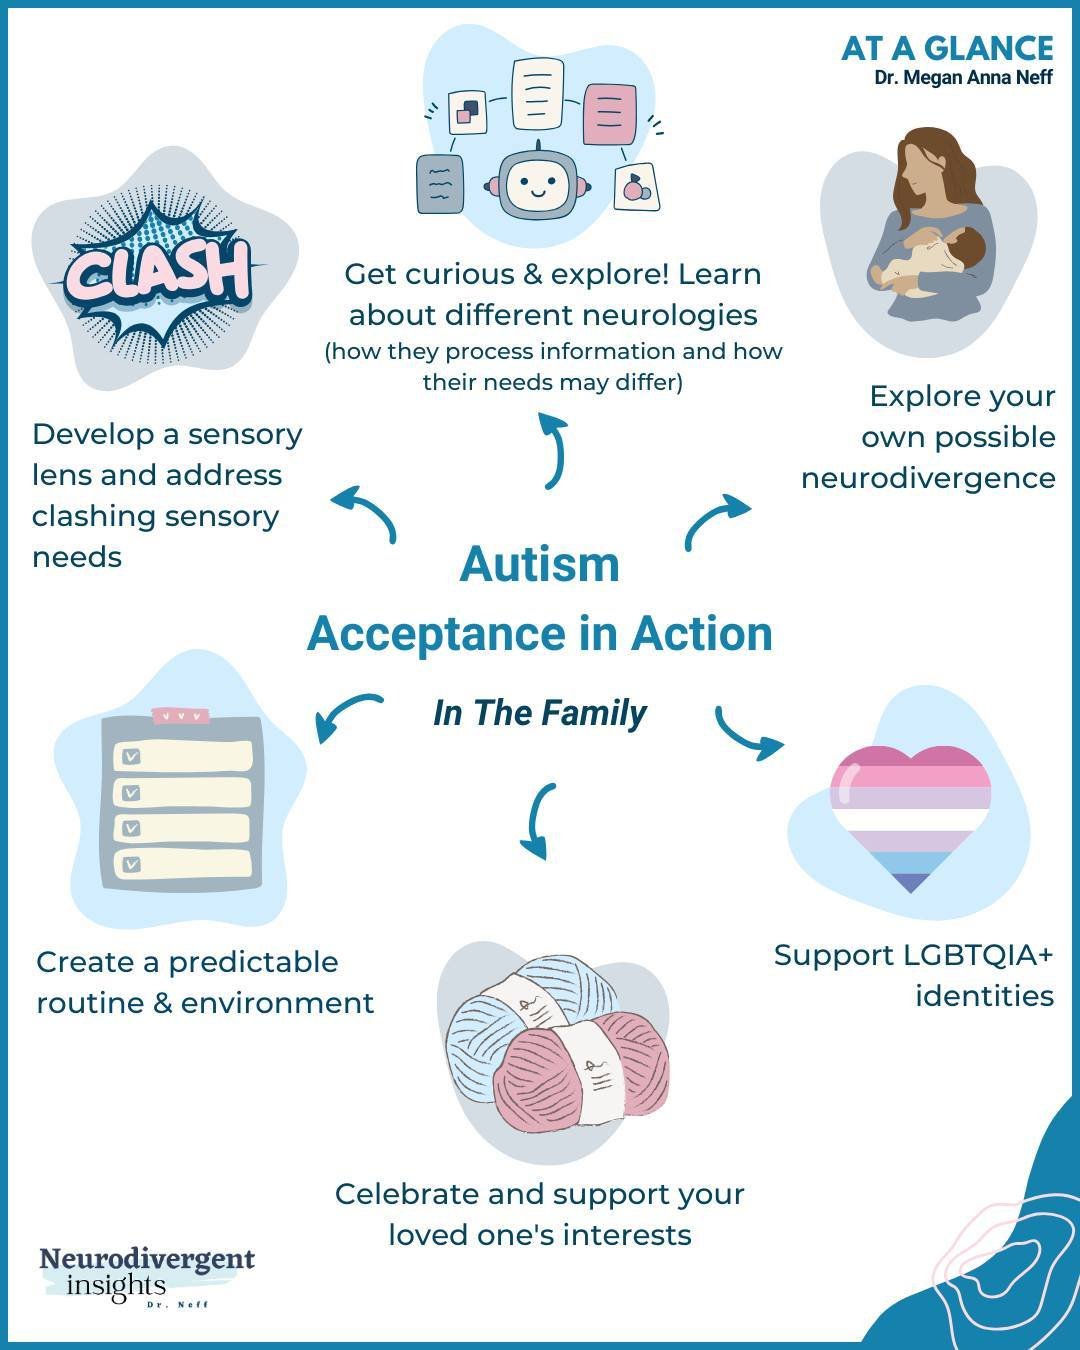 #ConcreteAcceptance: Day 1 of 7 - Autism Inclusion within Families⁠
⁠
Last year, I set out to demystify the abstract concept of &quot;autism acceptance&quot; by breaking it down into actionable steps. ⁠
⁠
This April, I'm revisiting this initiative, r